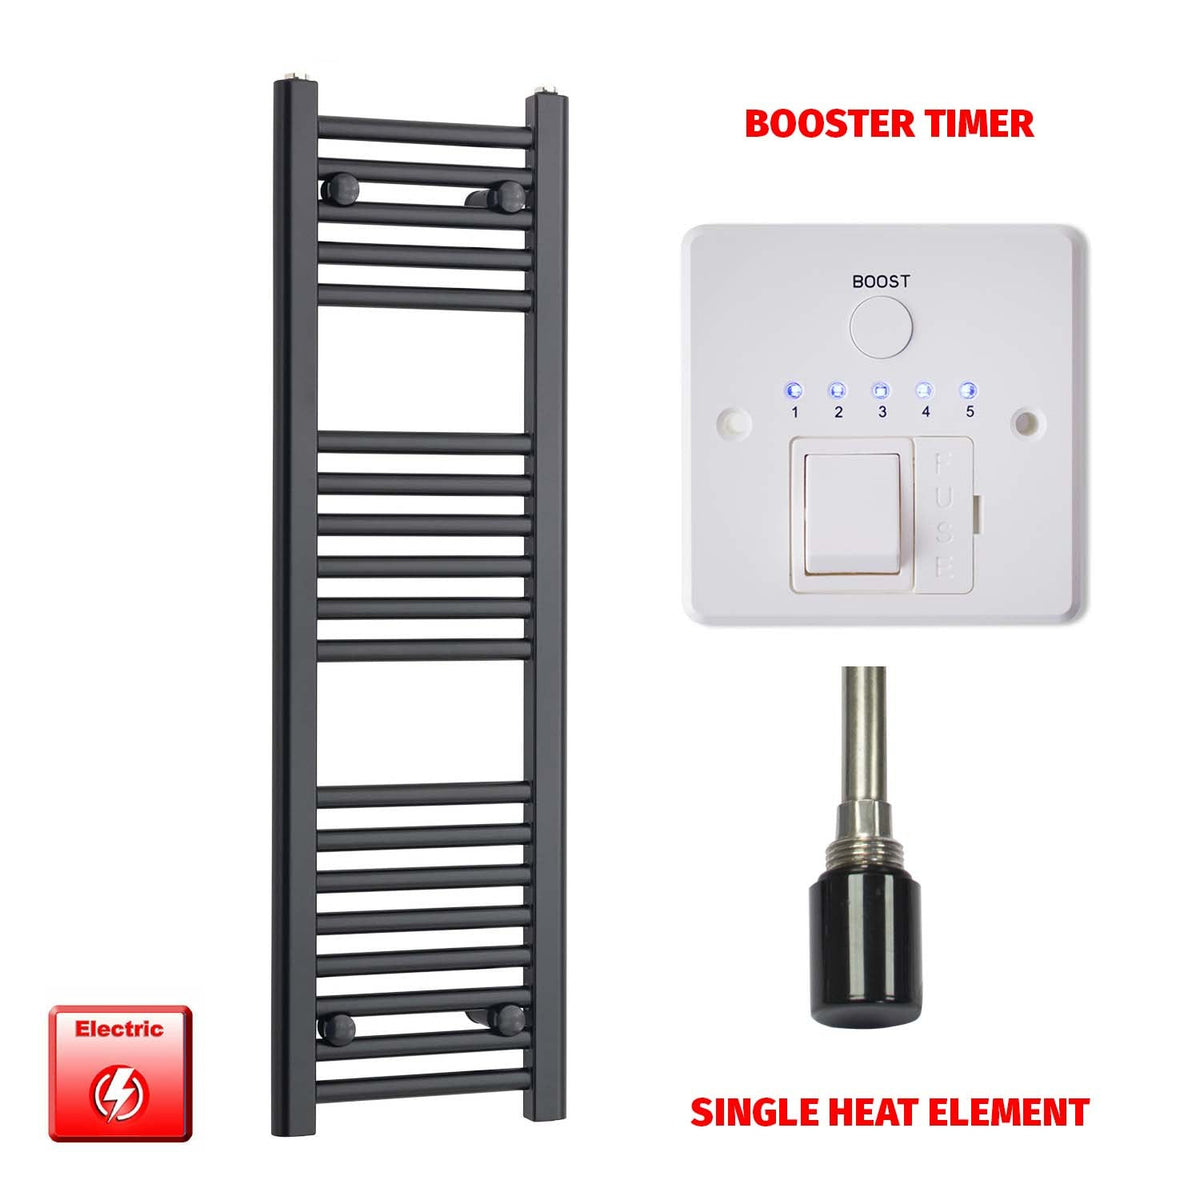 1000mm High 300mm Wide Flat Black Pre-Filled Electric Heated Towel Rail Radiator Booster Timer